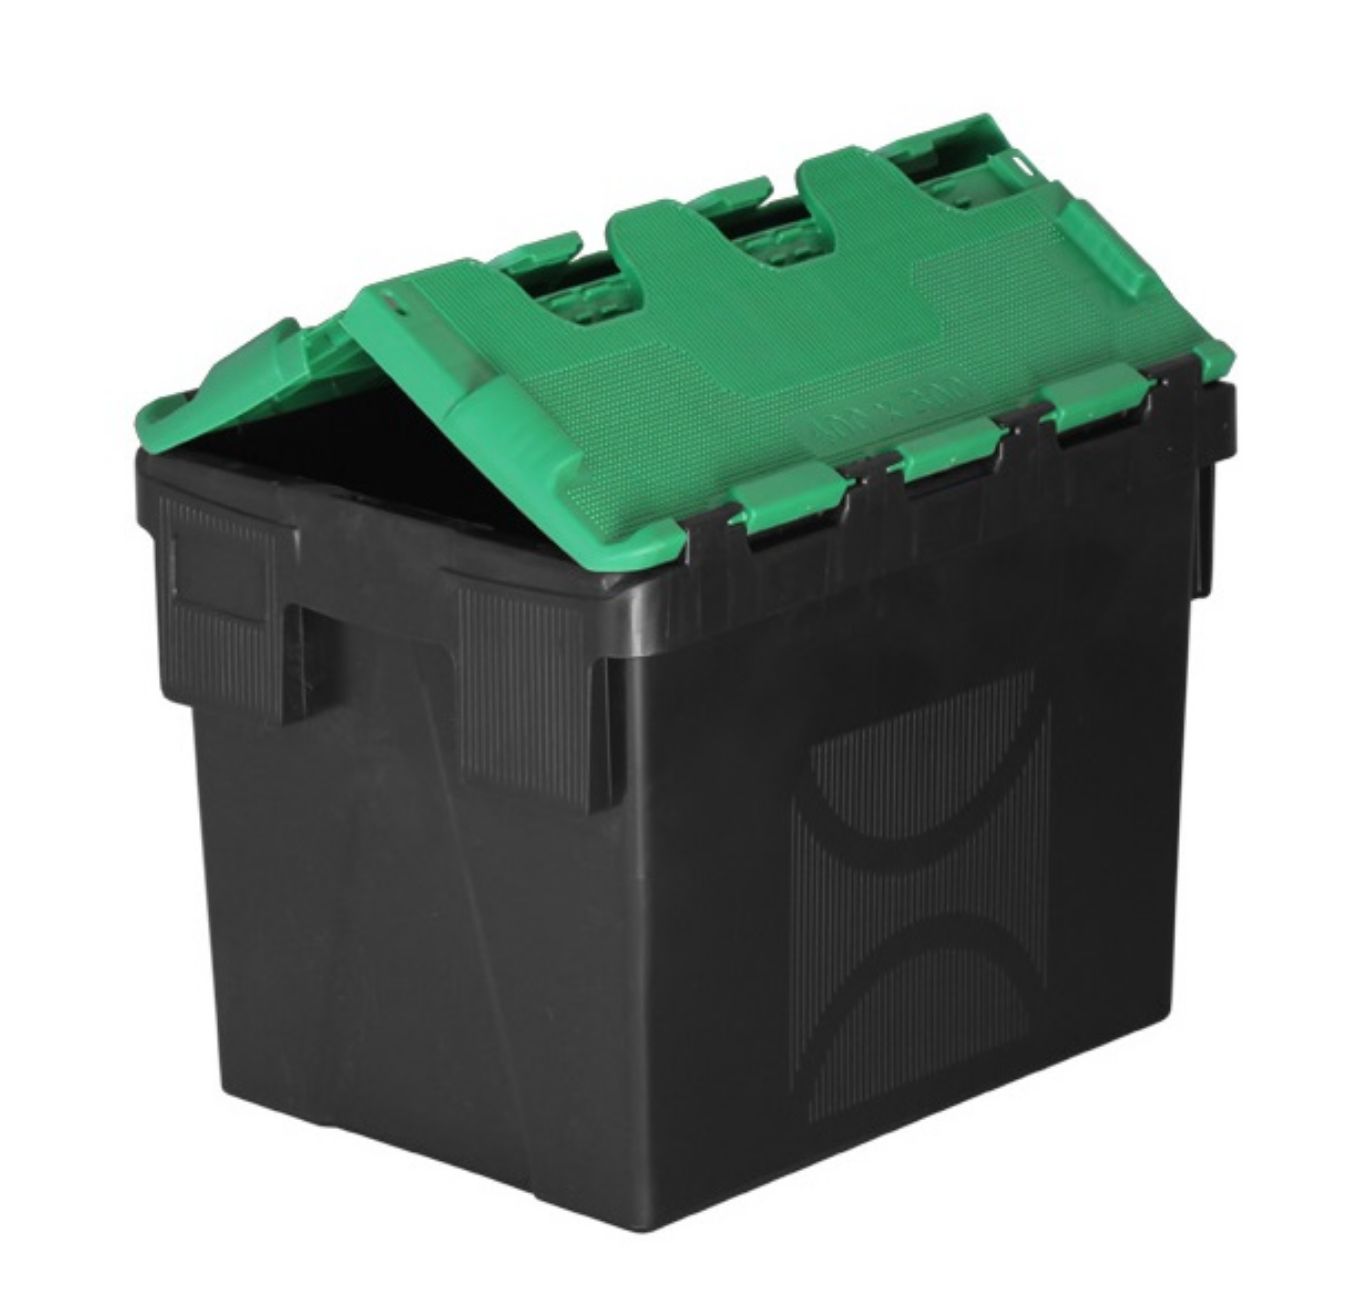 Picture for category Tote Boxes & Plug Seals